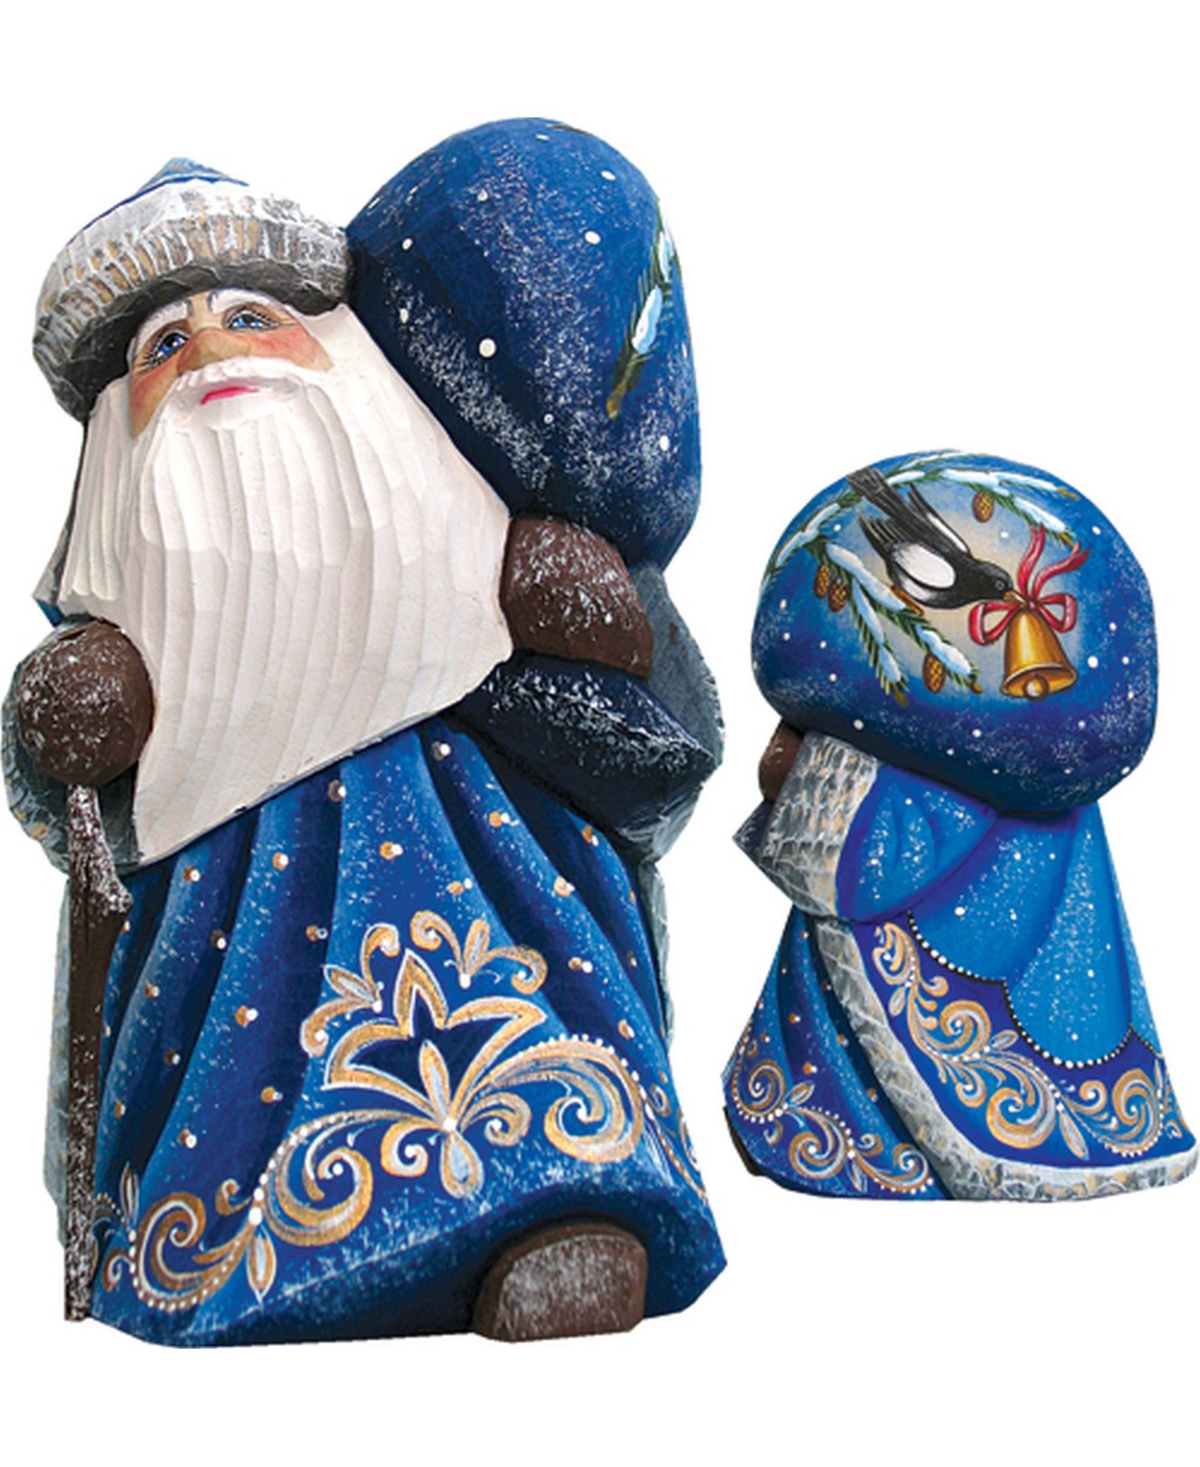 Woodcarved and Hand Painted Santa Midnight Yuletide Chorus with Bag Figurine - Multi